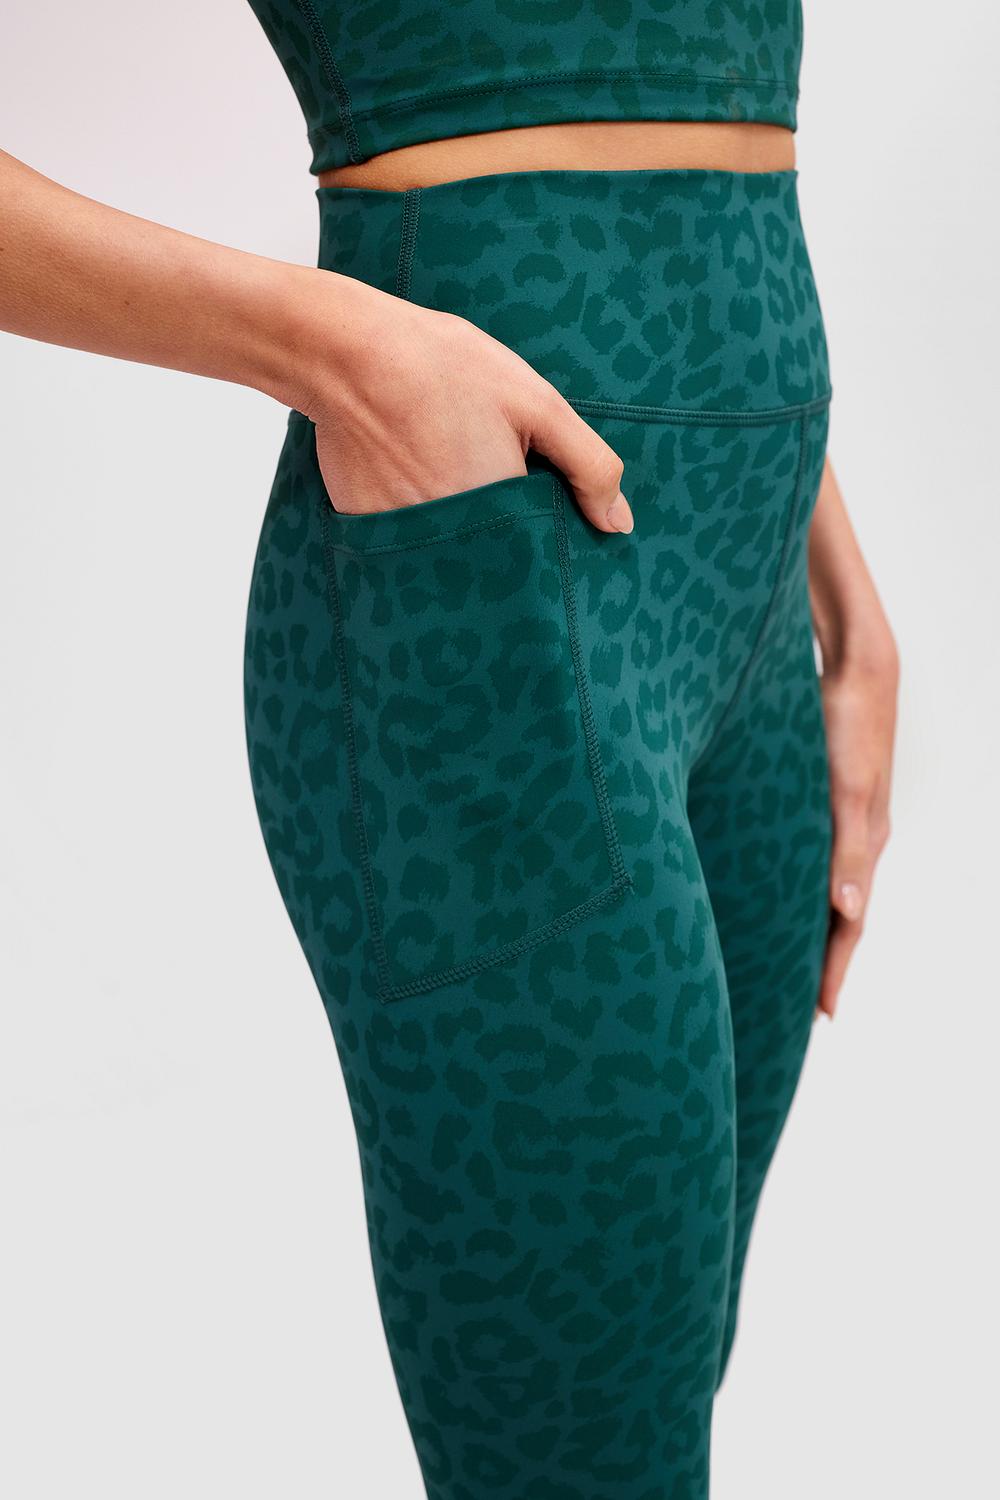 Green sports leggings with leopard print